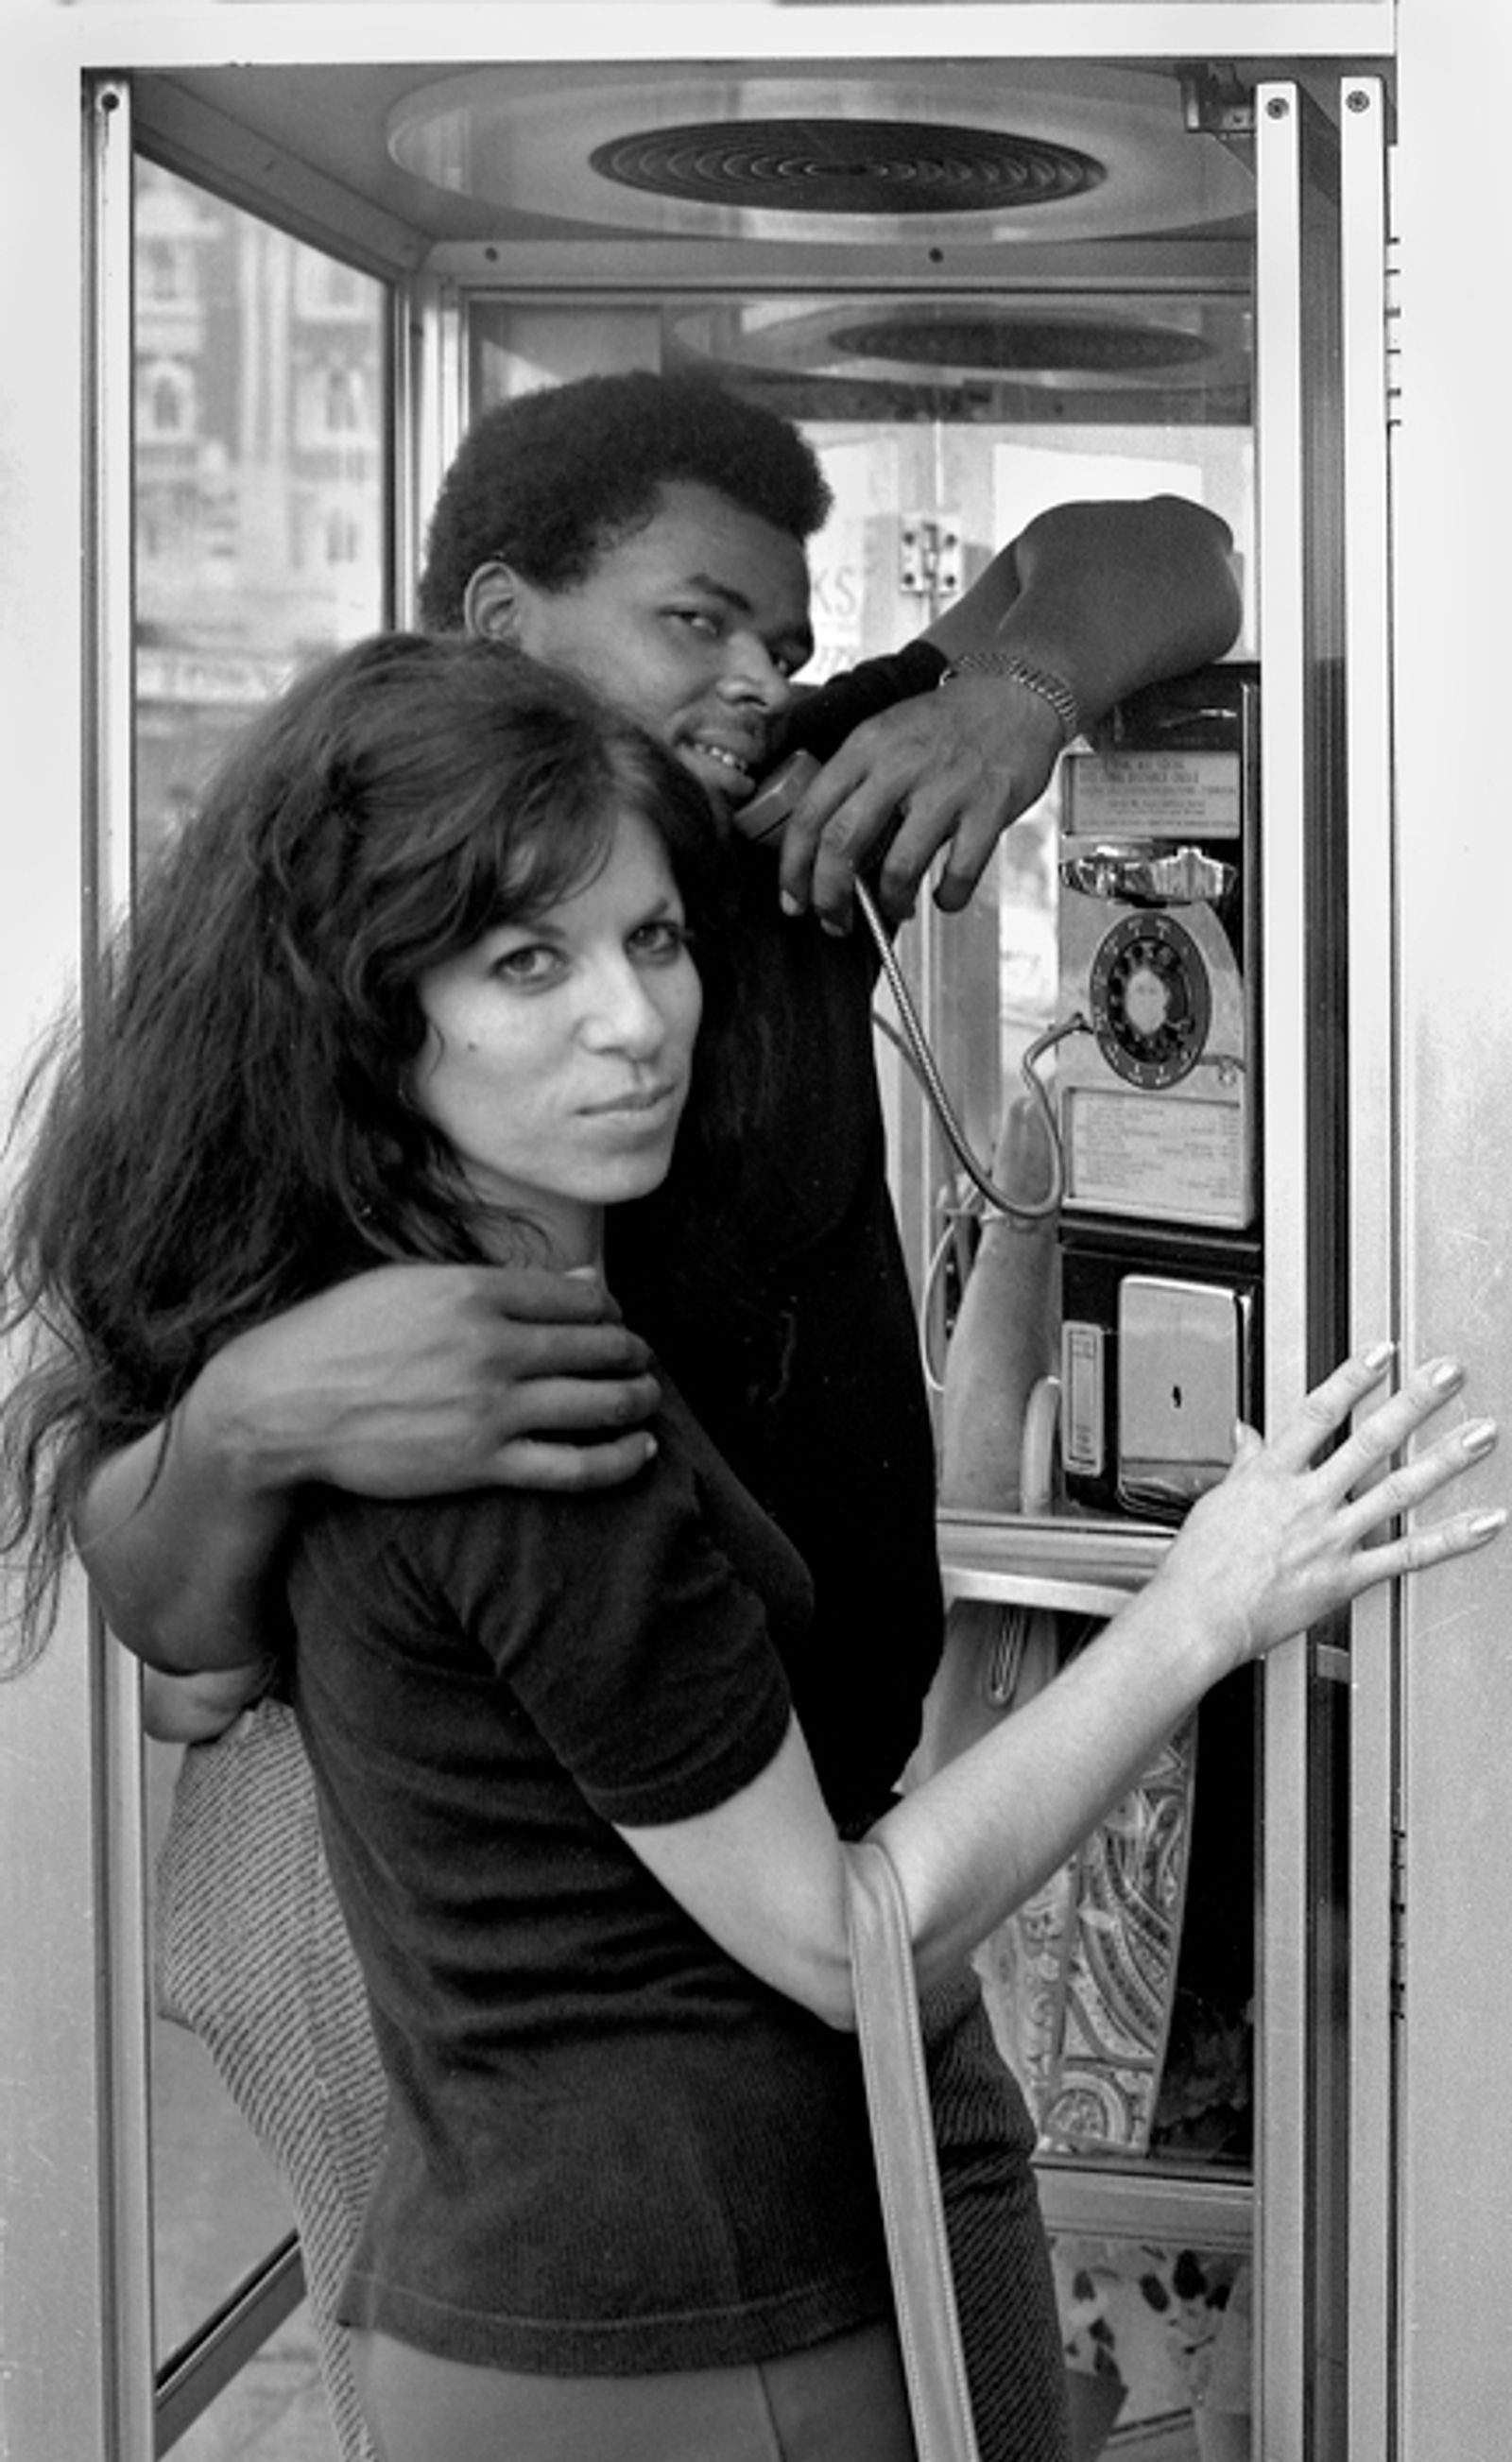 © Steven Edson - Couple in telephone booth. NYC, NY